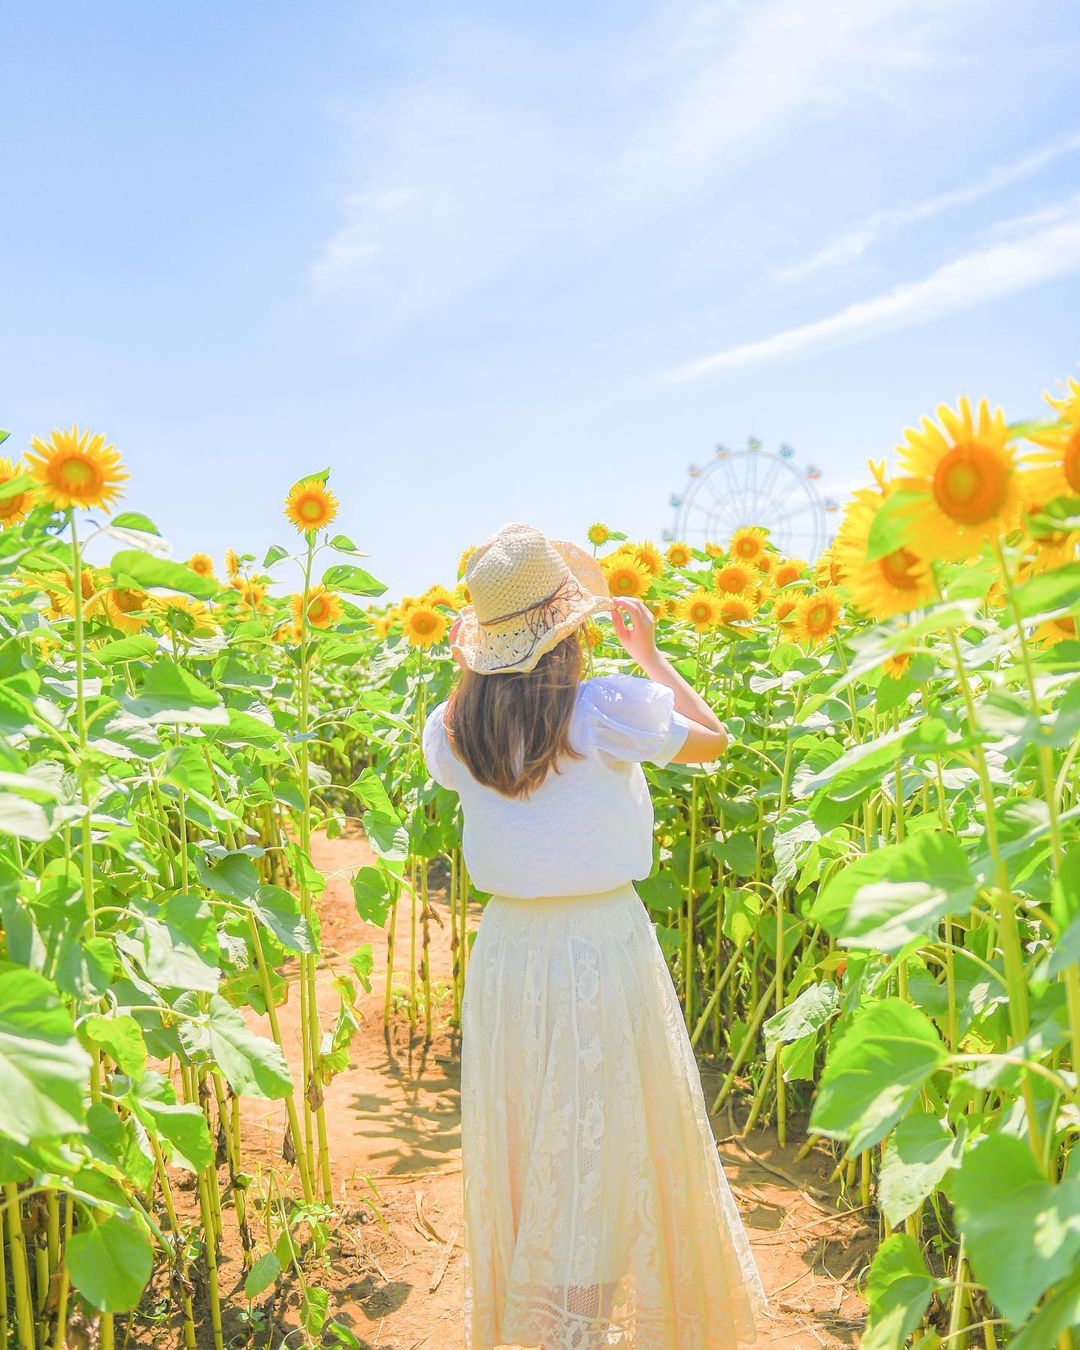 Golden Elegance: The Sunflower Spectacle Of Nagai Uminote Park Soleil Hill, Japan - Nature and Life